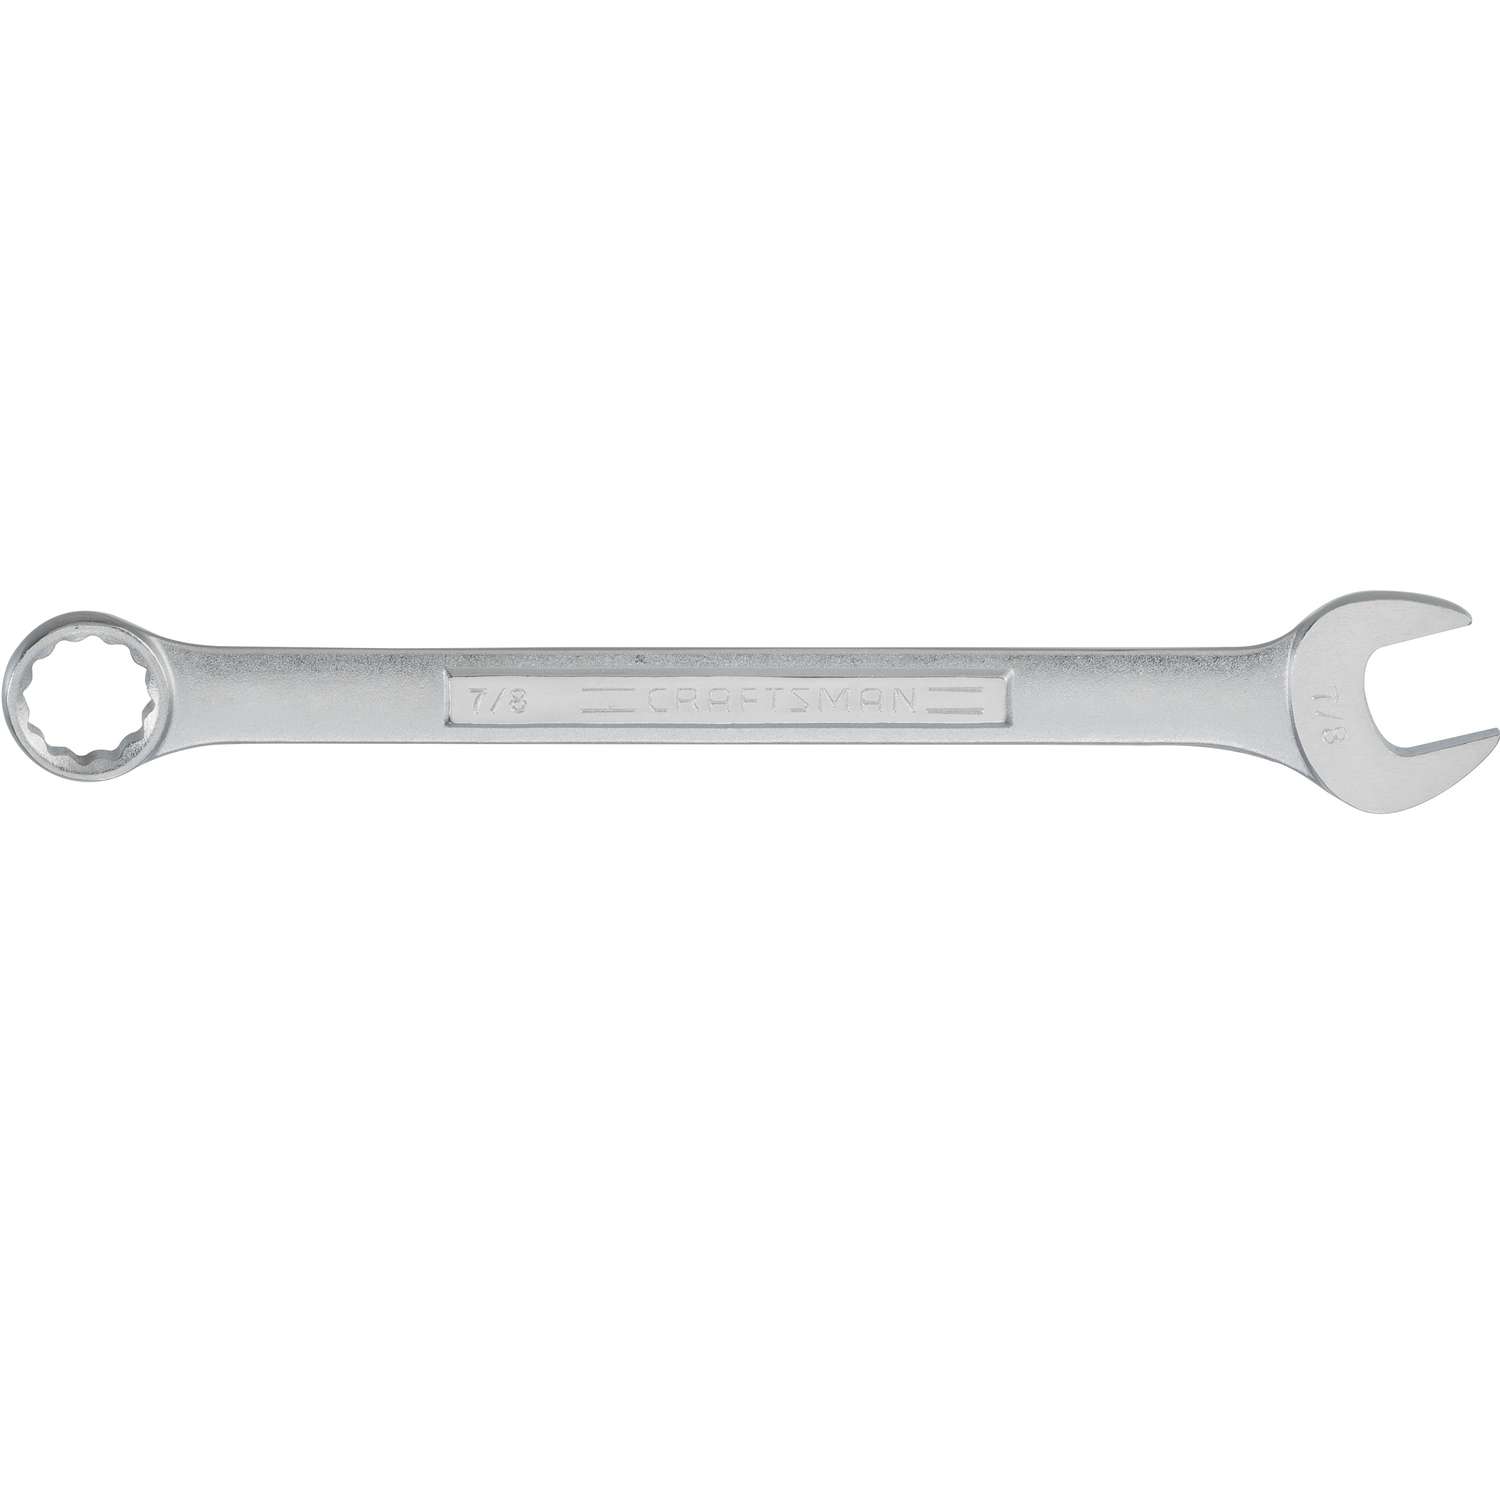 Craftsman 7/8 inch S X 7/8 inch S 12 Point SAE Combination Wrench 